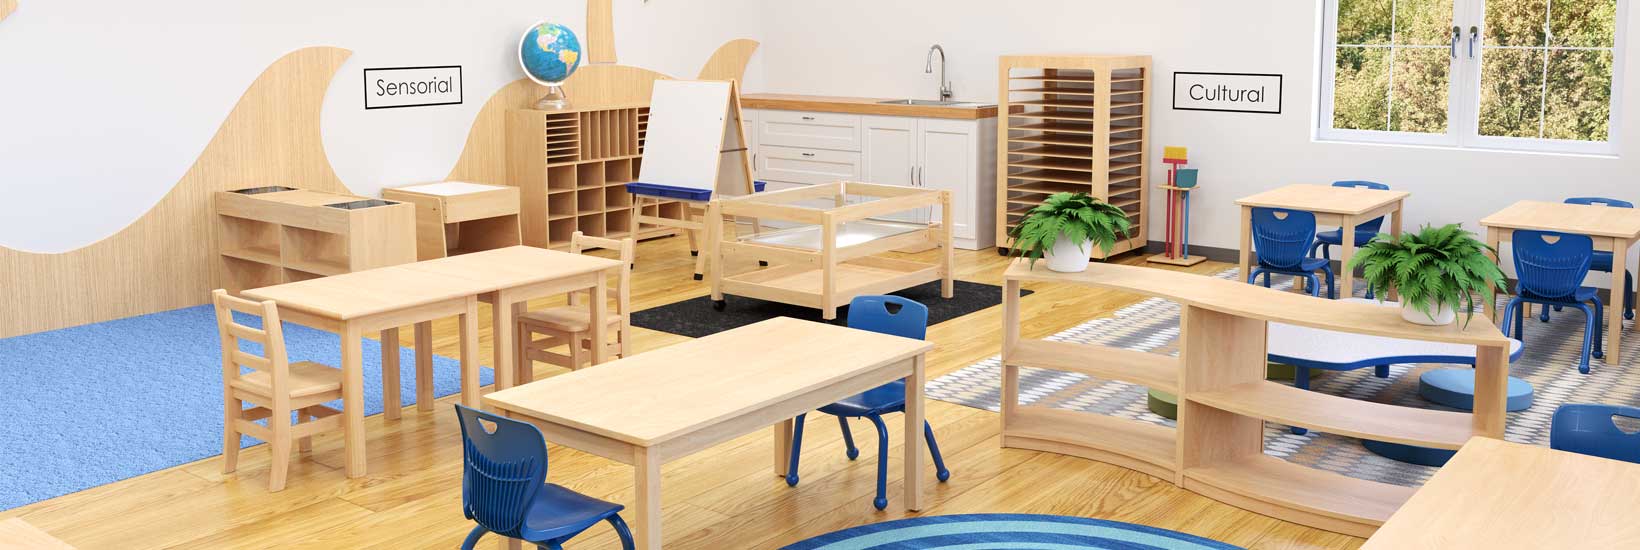 Early Childhood Montessori Space View 1